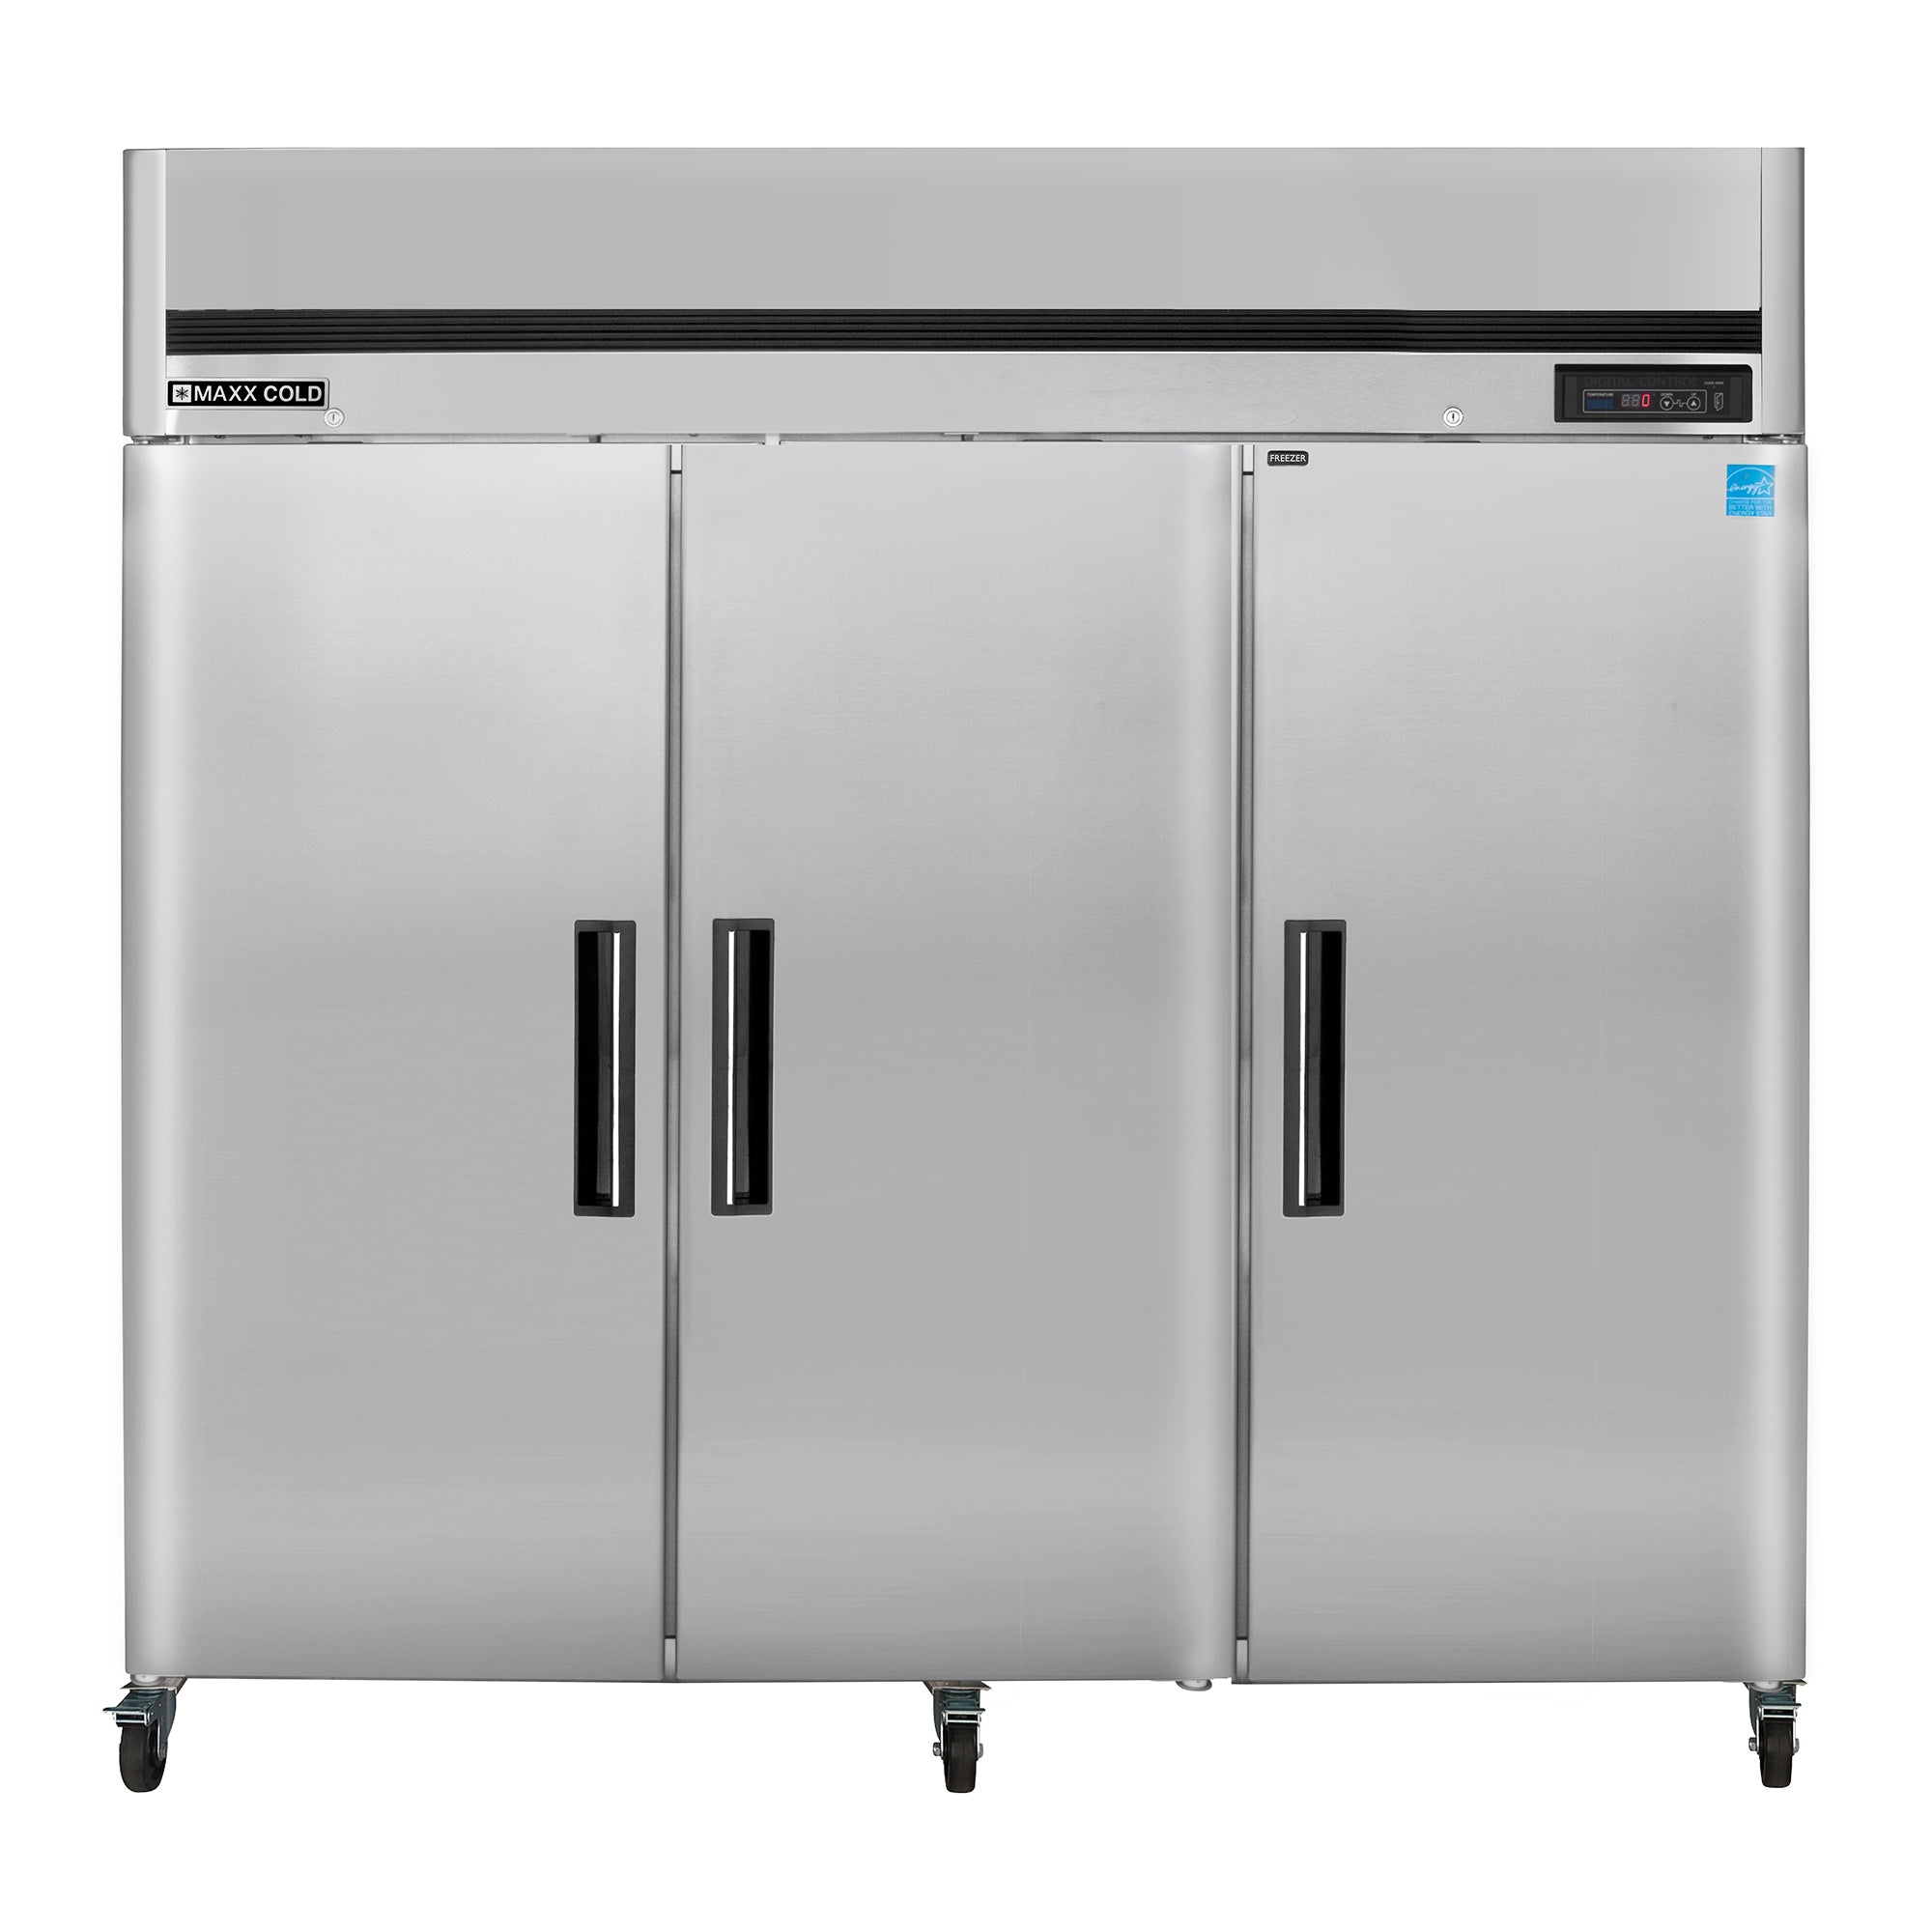 Maxx Cold - MCFT-72FDHC, Maxx Cold Triple Door Reach-In Freezer, Top Mount, 81"W, 72 cu. ft. Storage Capacity, Energy Star Rated, in Stainless Steel